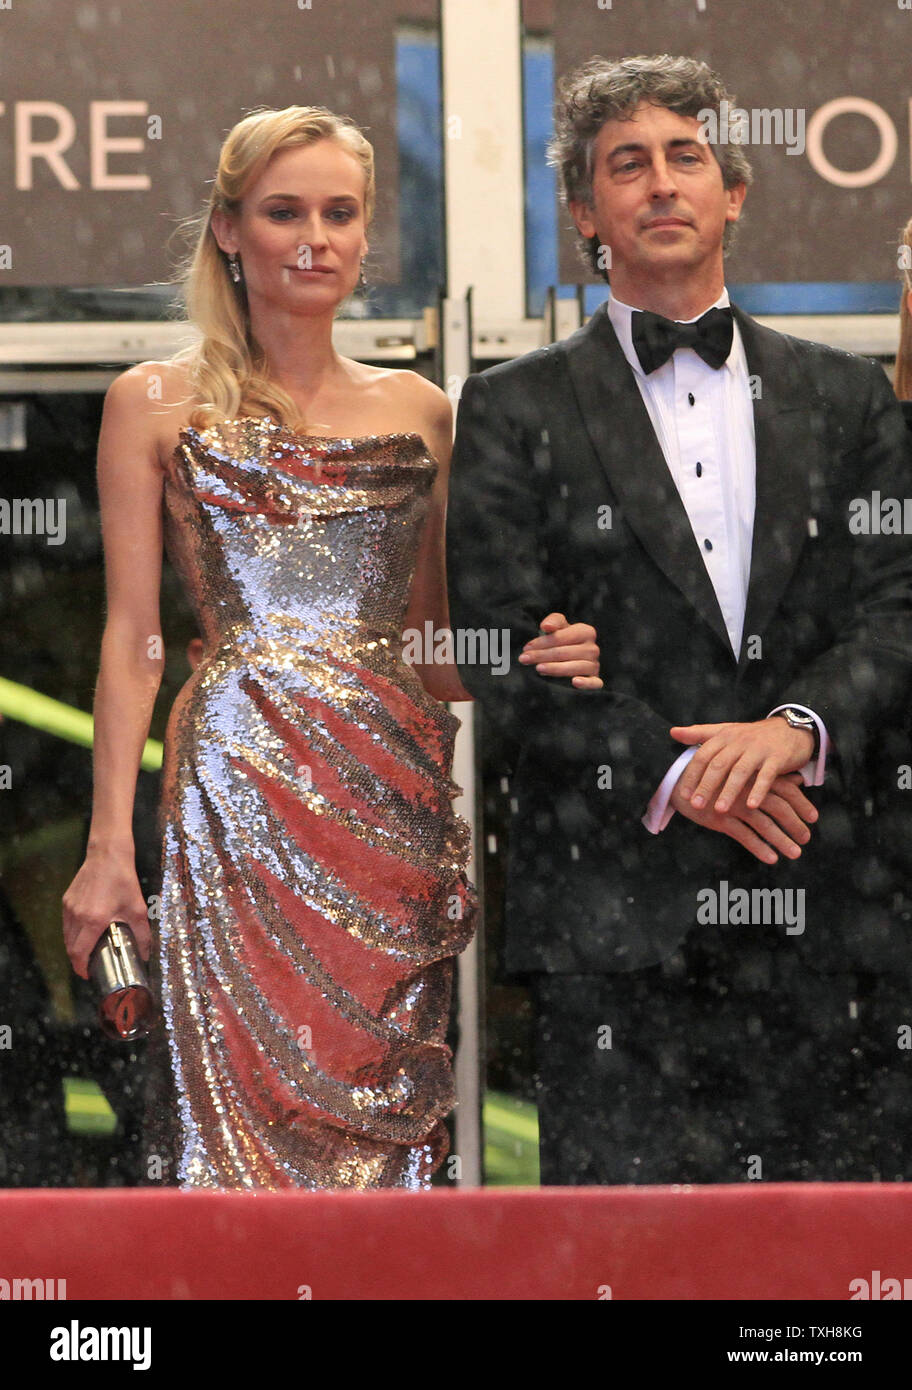 Jury members Diane Kruger (L) and Alexander Payne arrive at the top of the  red-carpeted steps of the Palais des Festivals before the screening of the  film "Amour" during the 65th annual